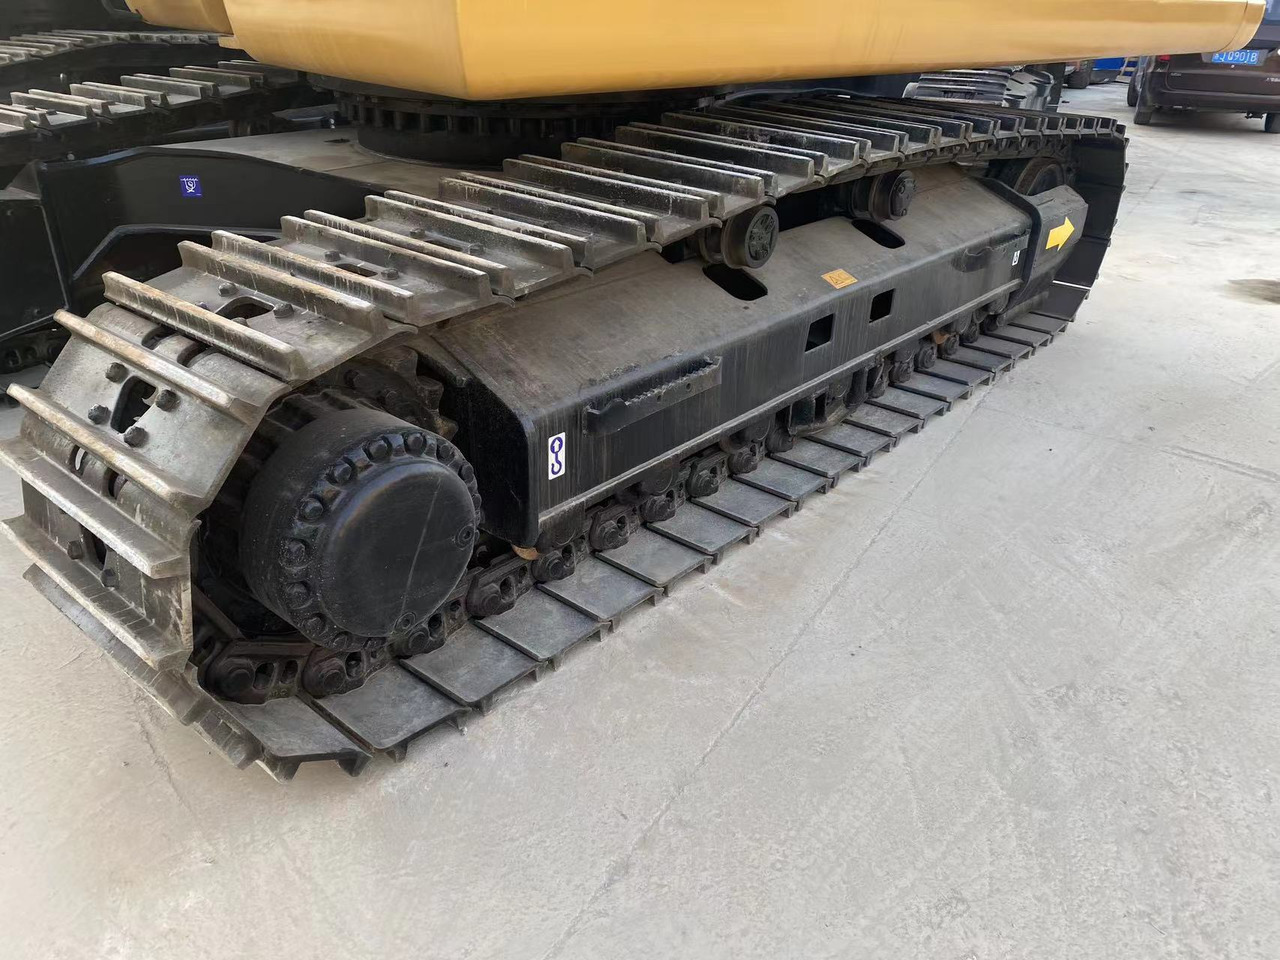 Bager gusjeničar High quality Caterpillar used hydraulic crawler excavator 330D low working hours with hammer crucher in ready stock: slika Bager gusjeničar High quality Caterpillar used hydraulic crawler excavator 330D low working hours with hammer crucher in ready stock